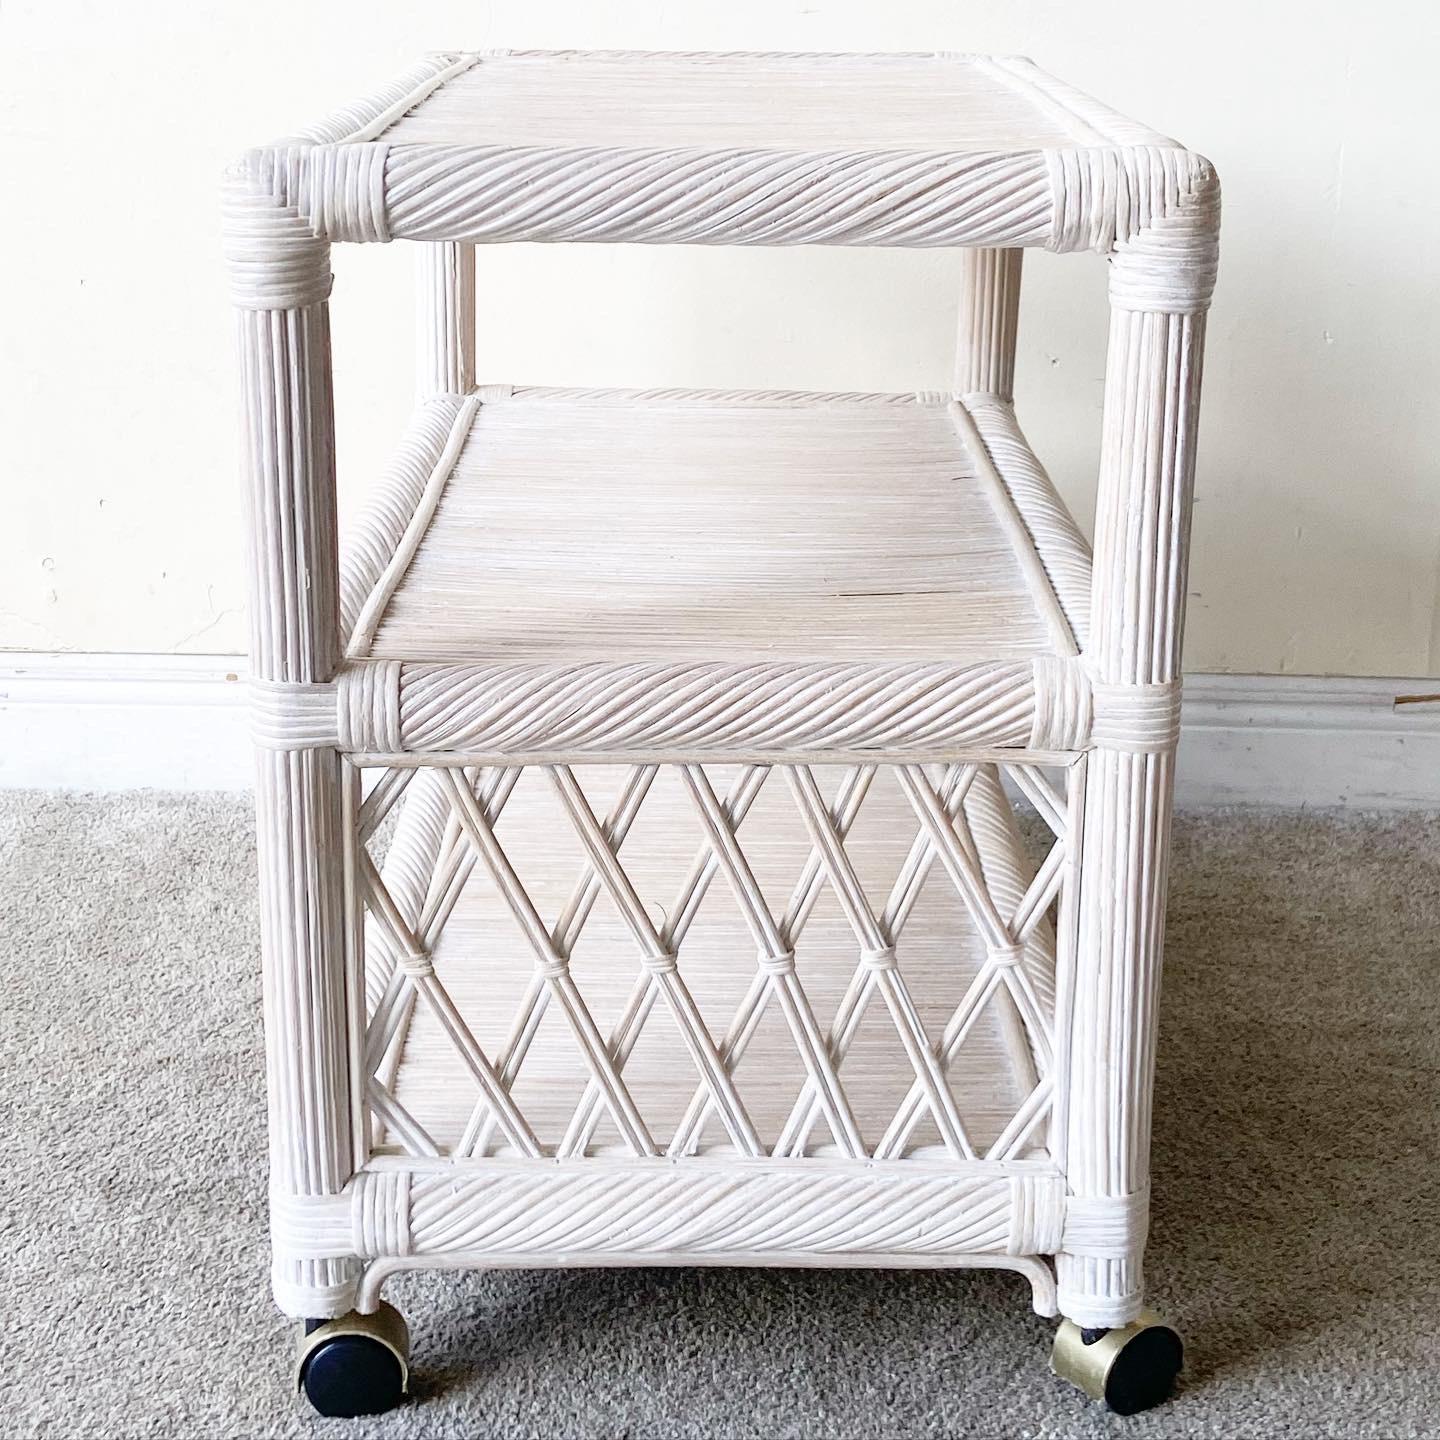 Exceptional bar cart with a whitewash finish. Features twisted pencil reed and rattan frame.
 